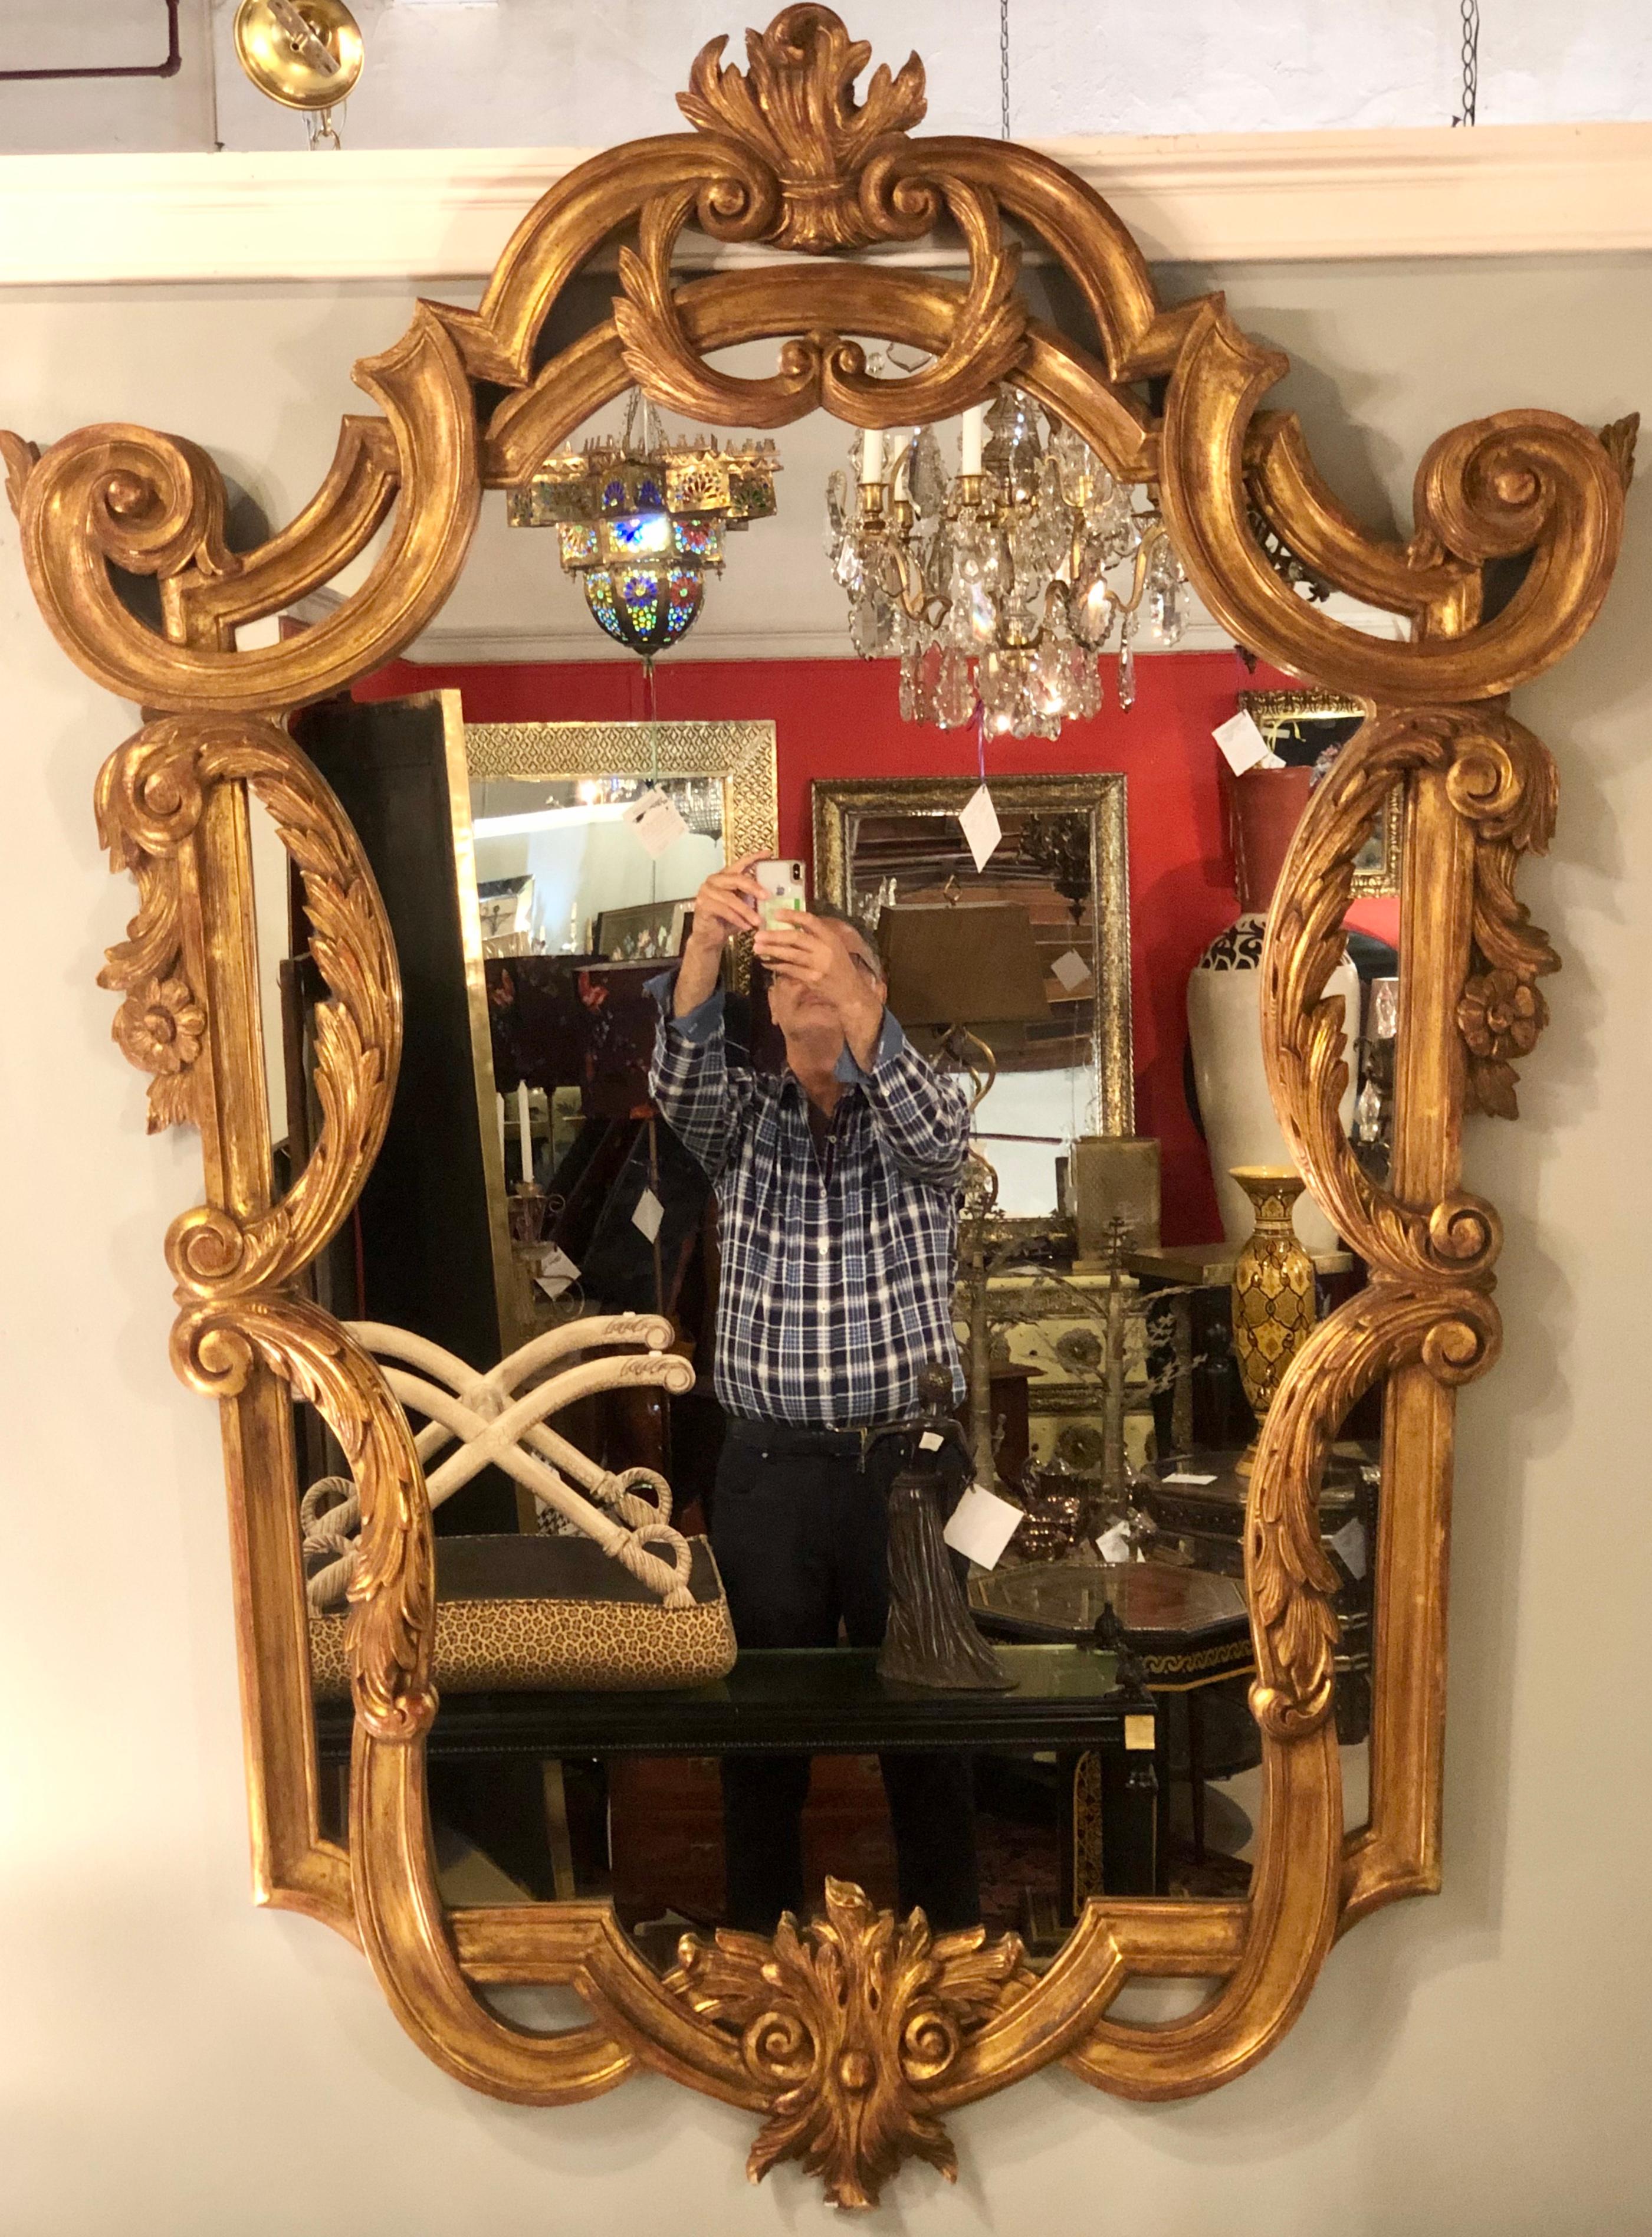 Pair of Louis XV style console, pier or wall mirrors. Giltwood carved frames that are second to none on these large and impressive wall or console mirrors. The pair with roses, scrolls and vines carved terminating in a flame finial.